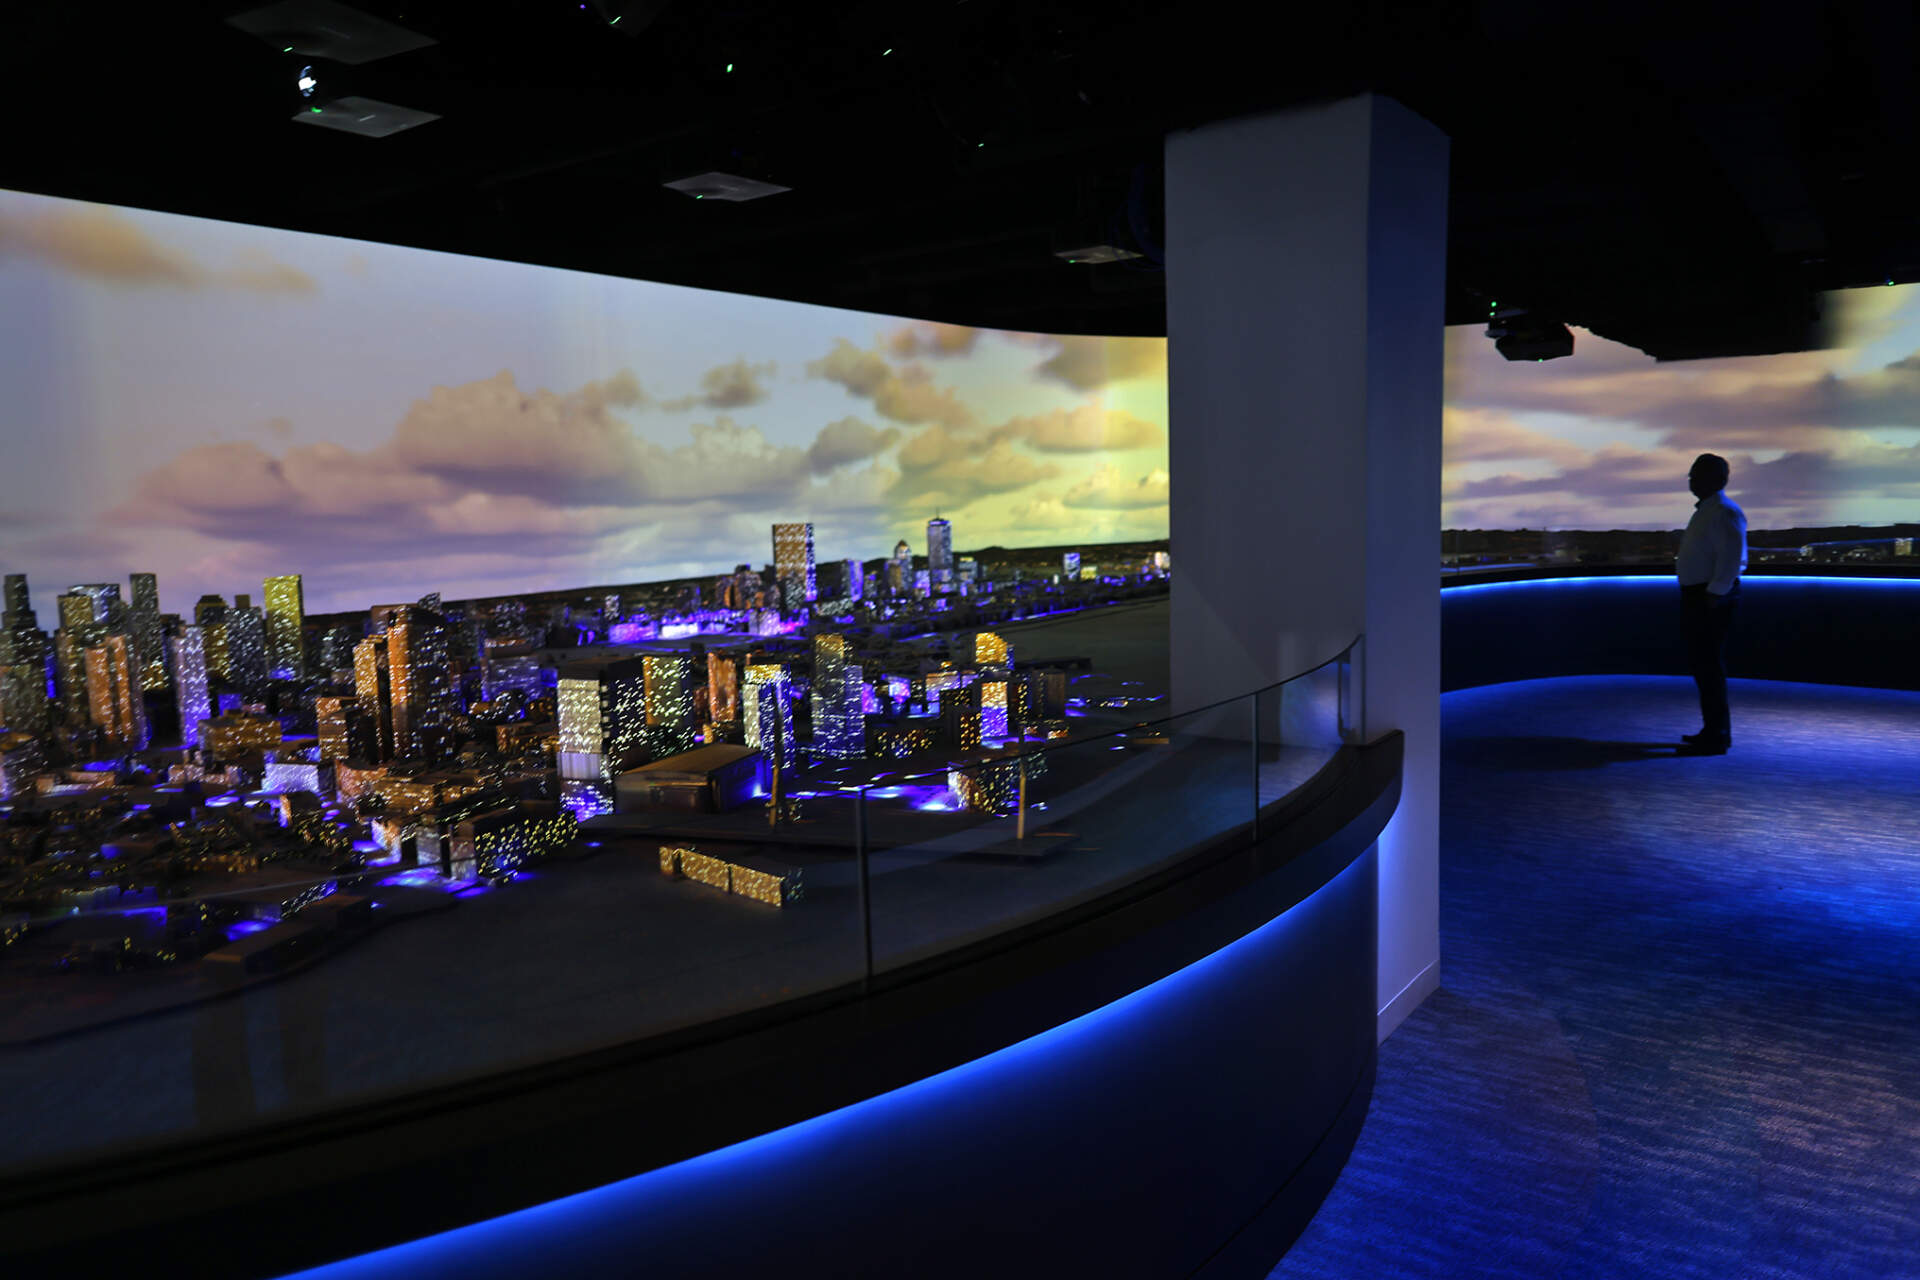 A 3-D model of Boston with a multimedia show allows visitors a detailed look at the city. (Photo by Lane Turner/The Boston Globe via Getty Images)